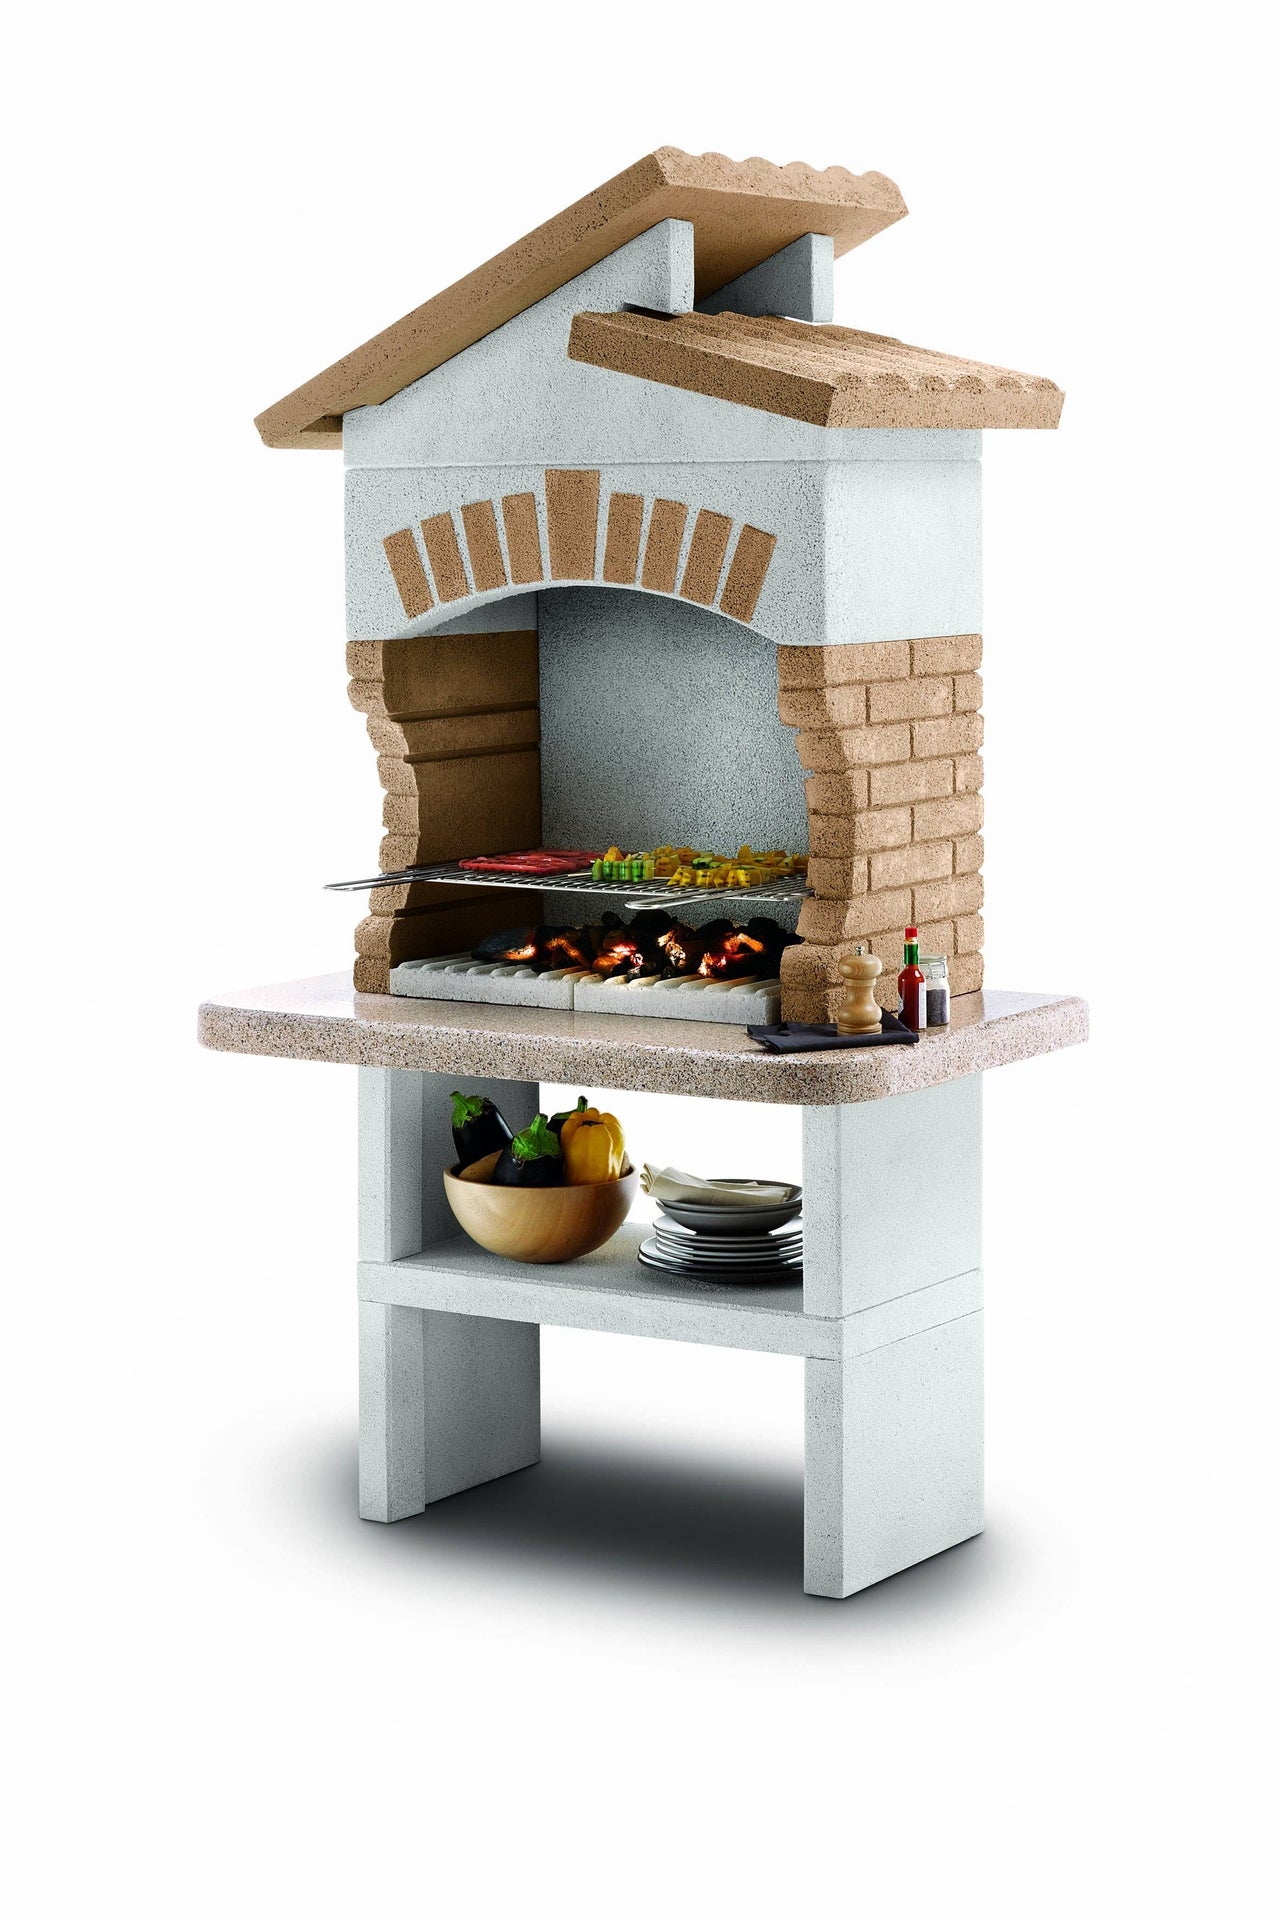 Palazzetti TUPAI Barbecue Outdoor Cooking Grill By Paini Pizza Ovens Paini 